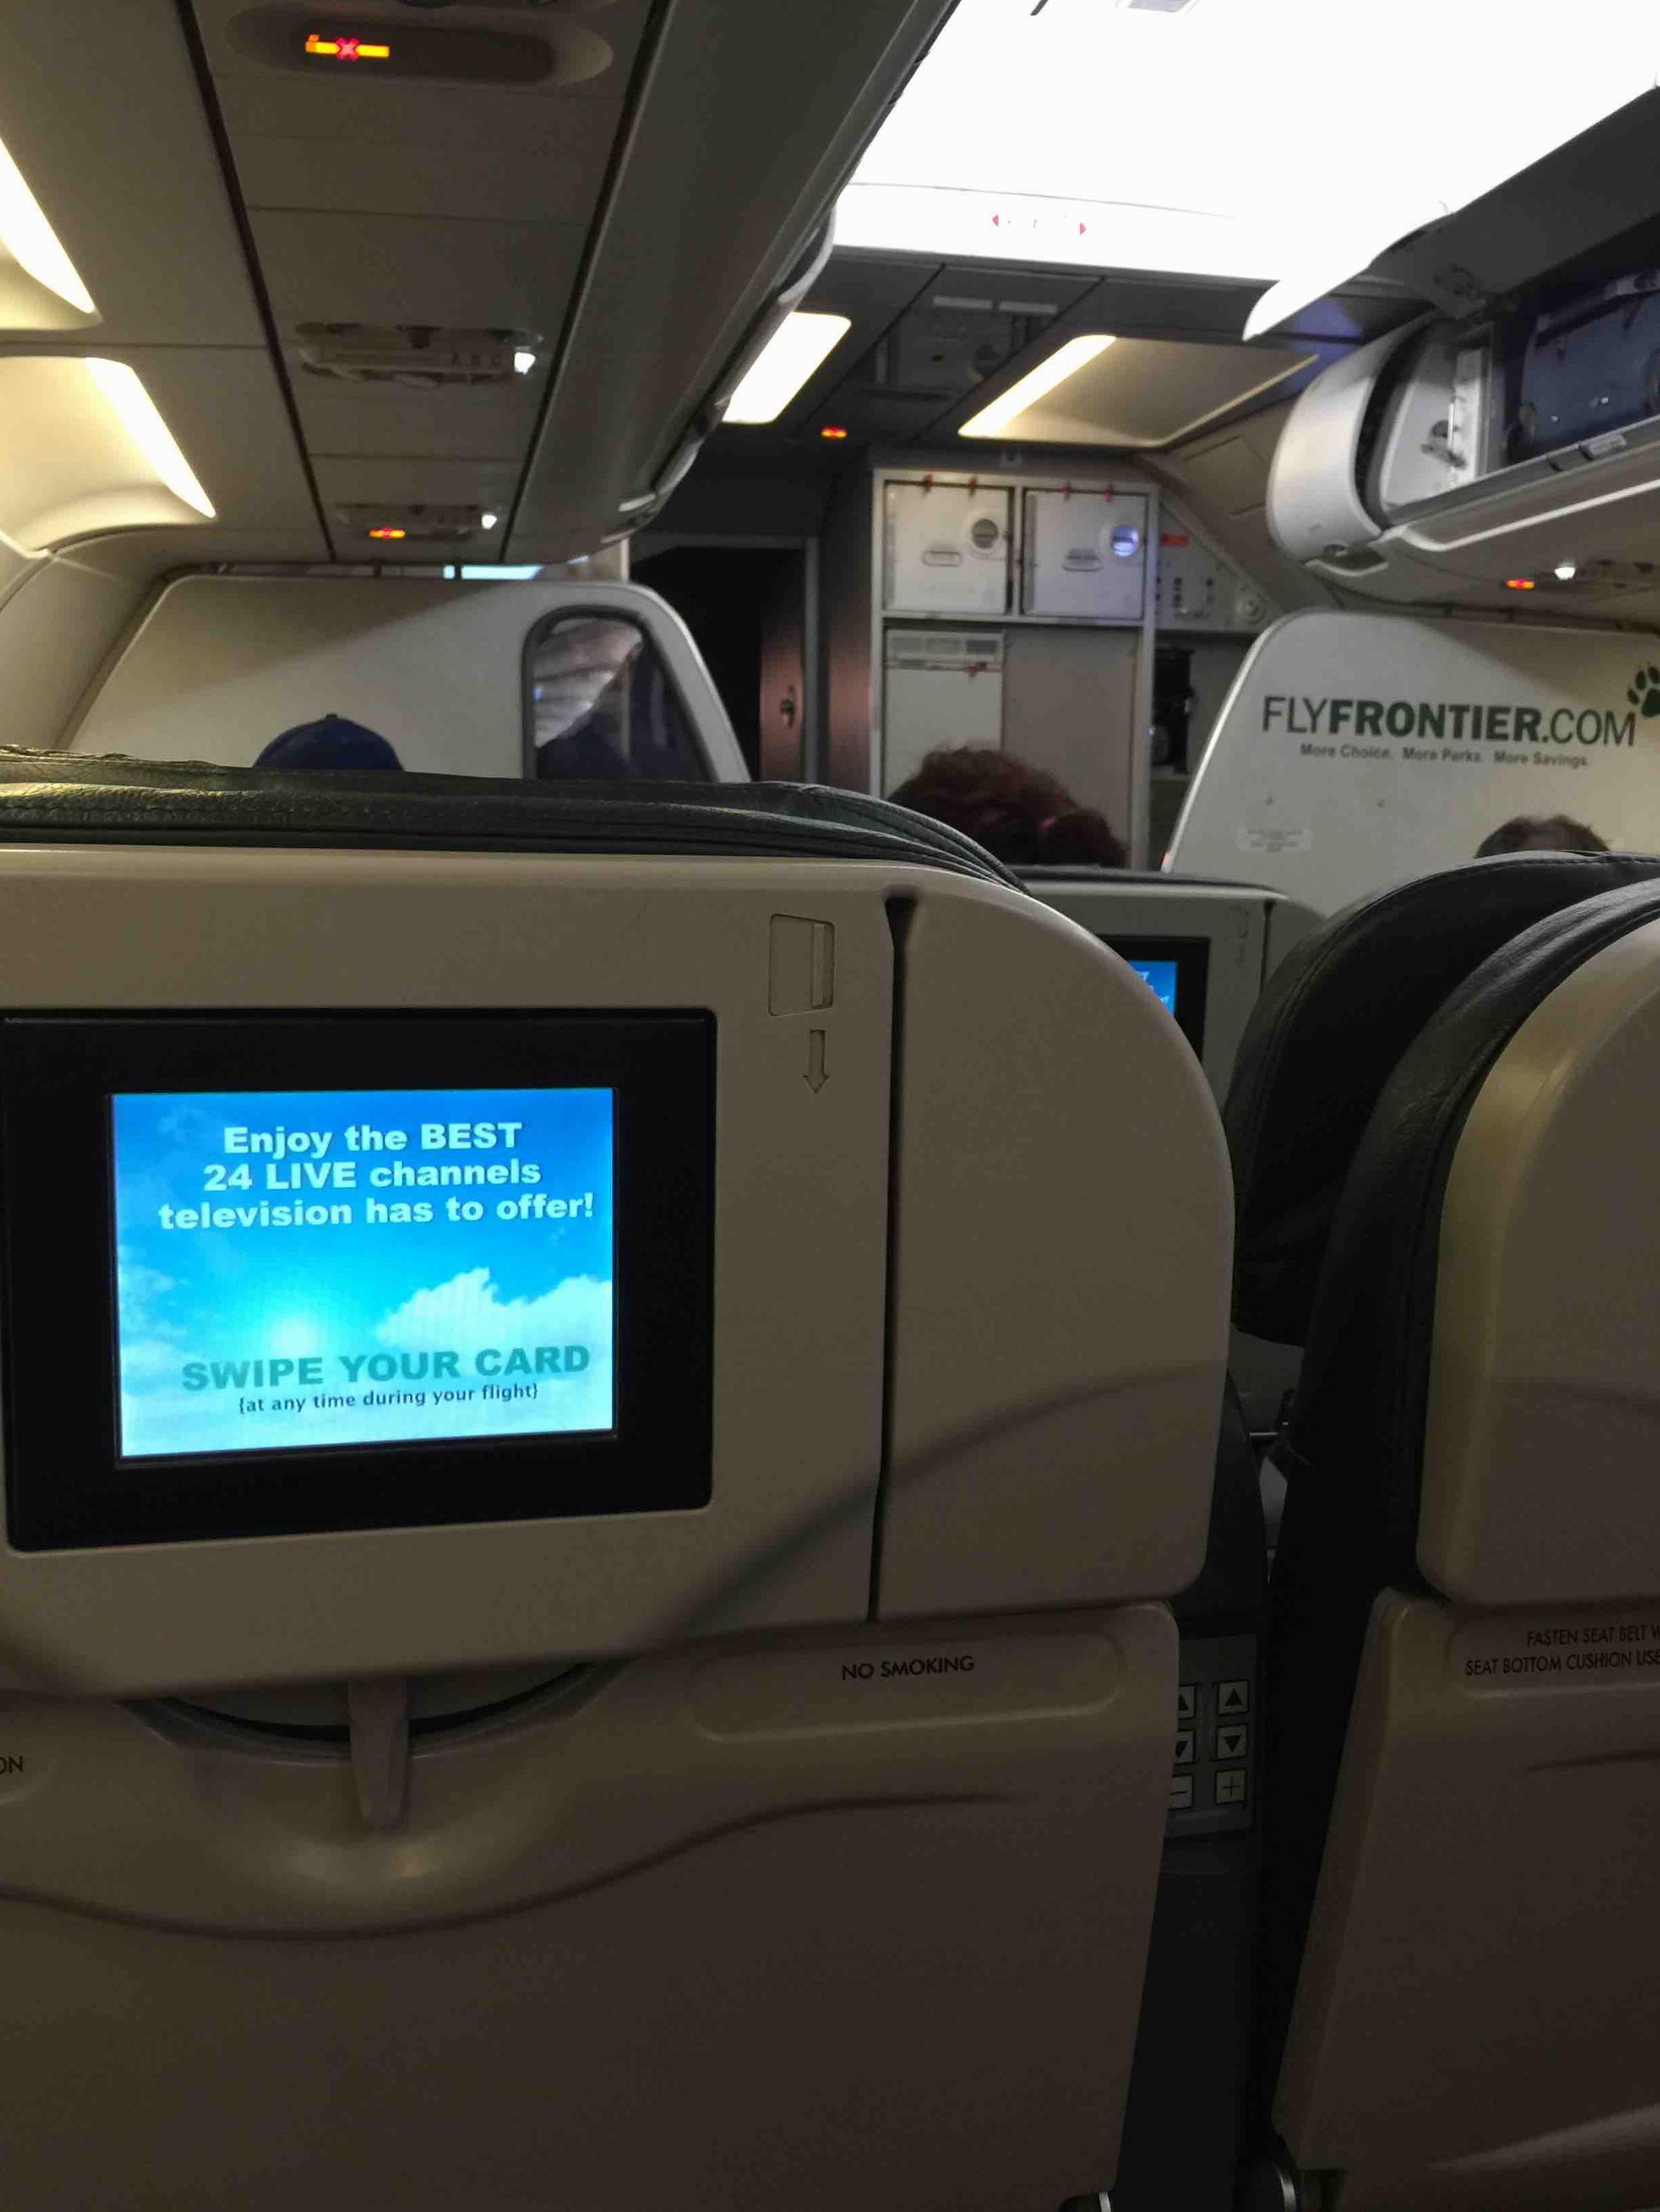 Frontier Airlines Airbus A319 100 cabin interior inflight entertainment system DirectTV on seatback